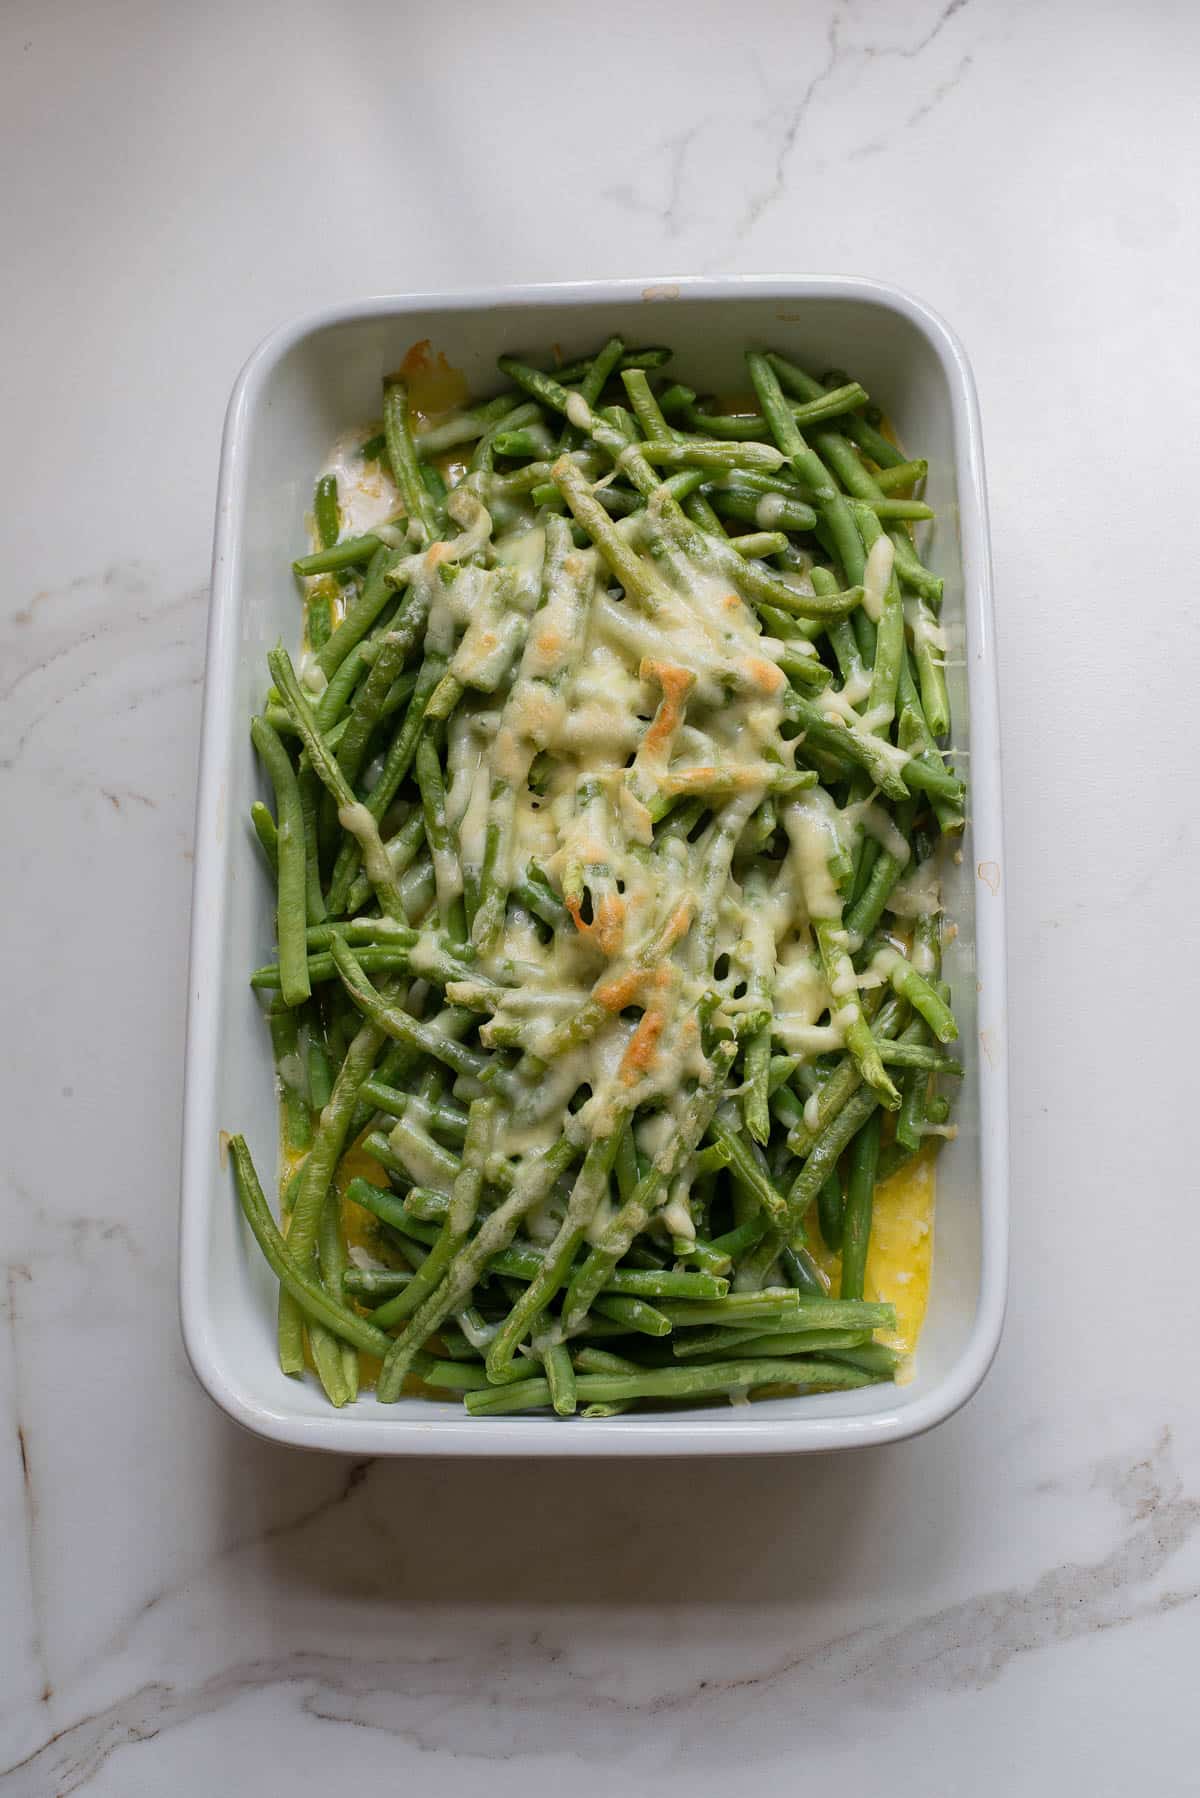 Green beans in white baking dish with melted cheese.